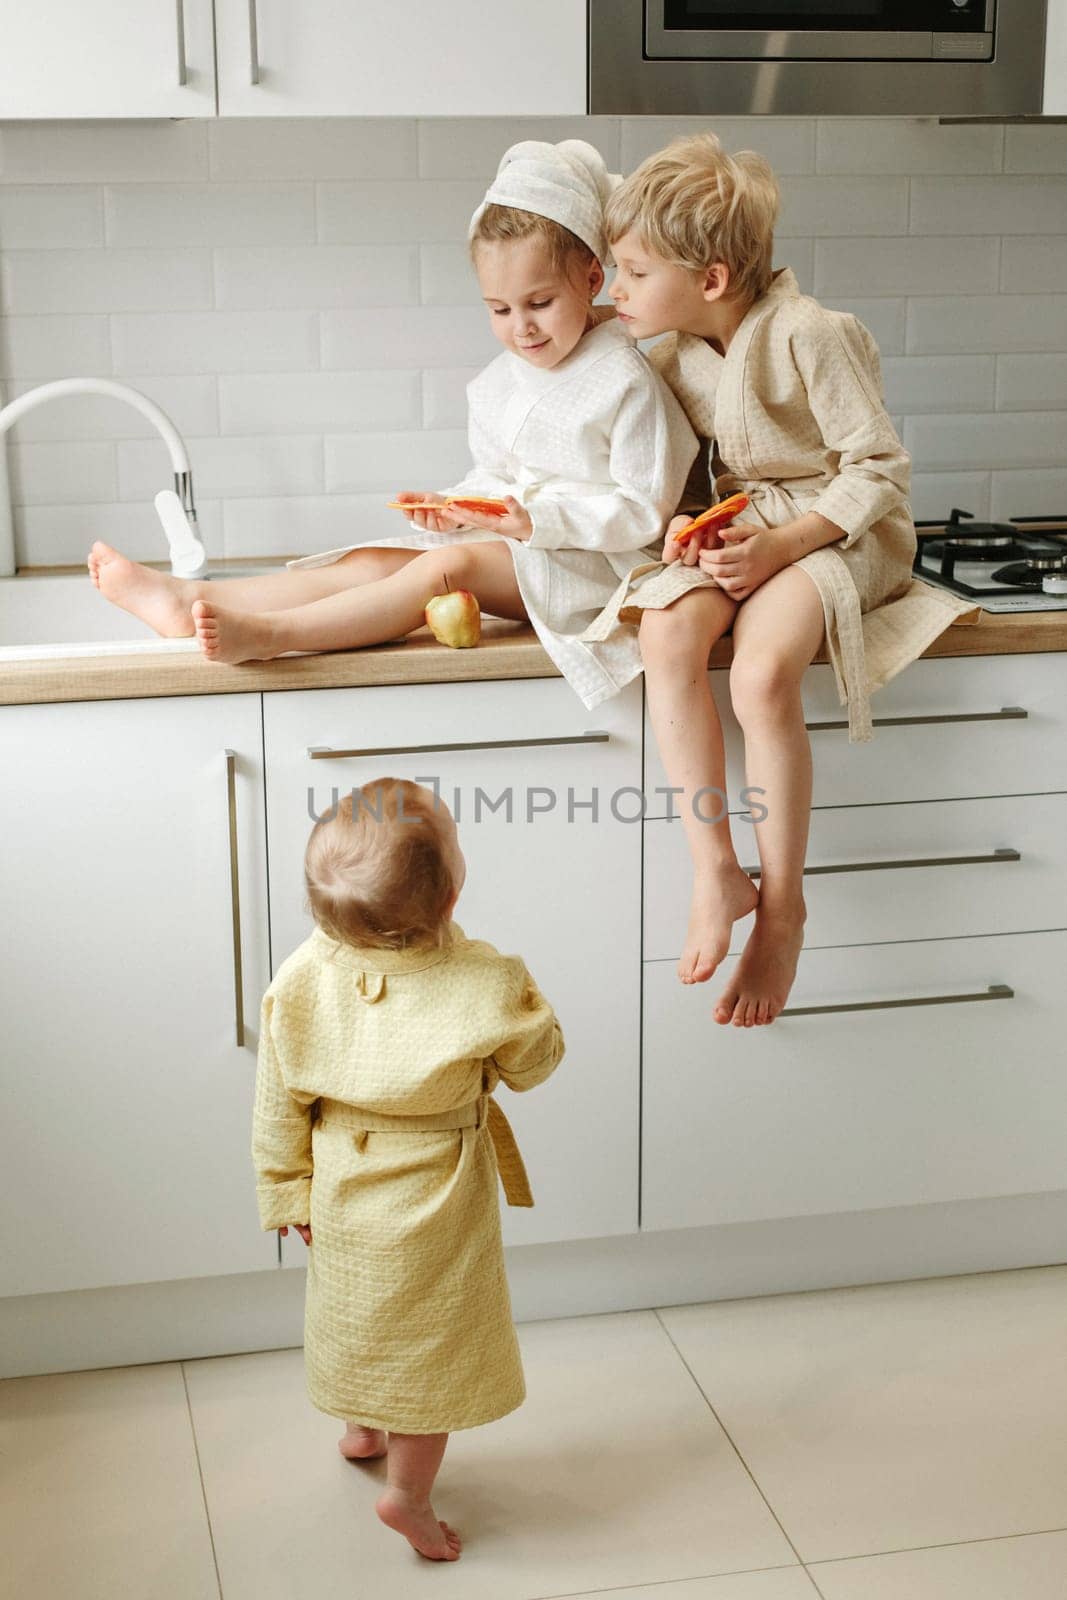 Children in bathrobes sit in the kitchen and hold candied oranges in their hands. by Sd28DimoN_1976